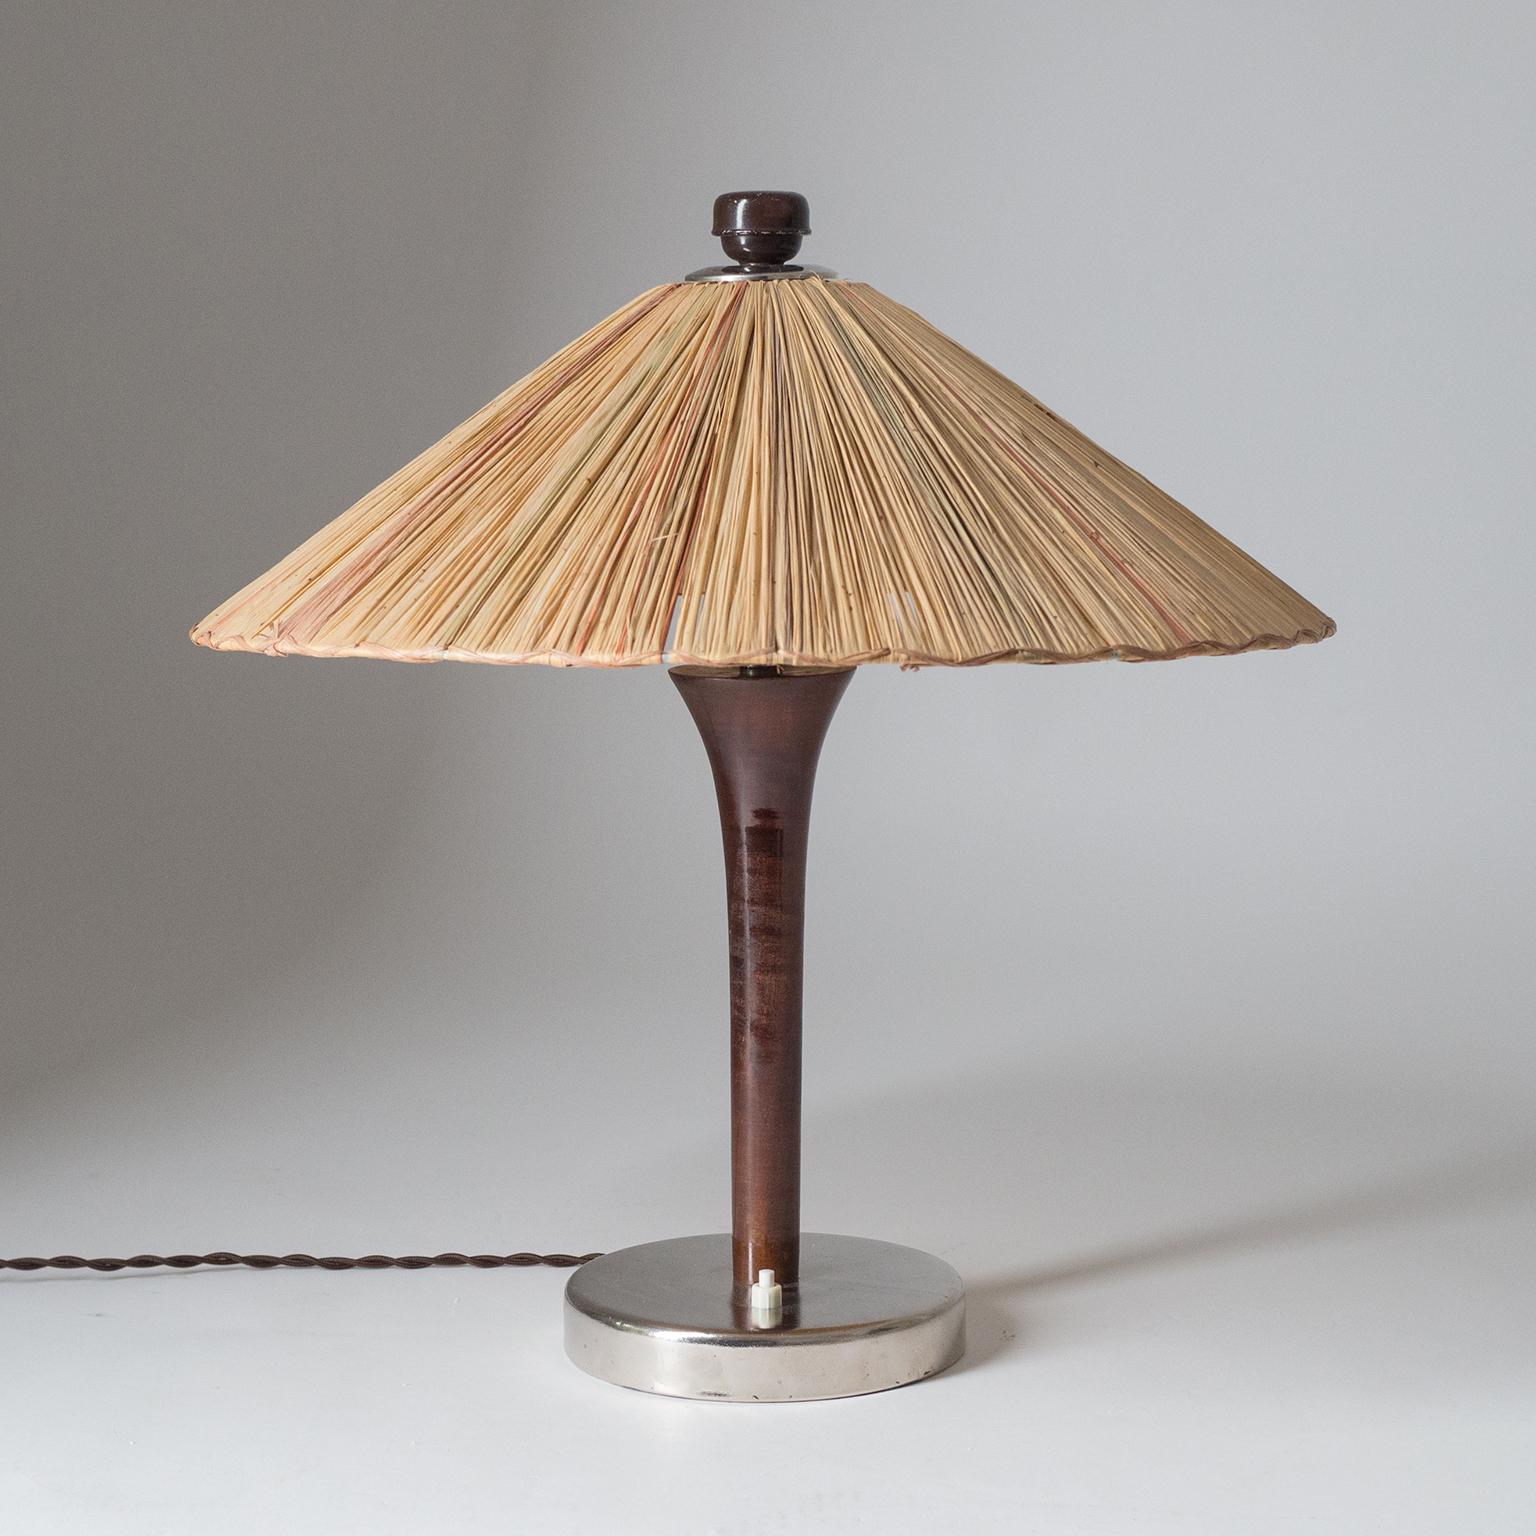 Art Deco Table Lamp, 1930s, with Original Straw Shade 2